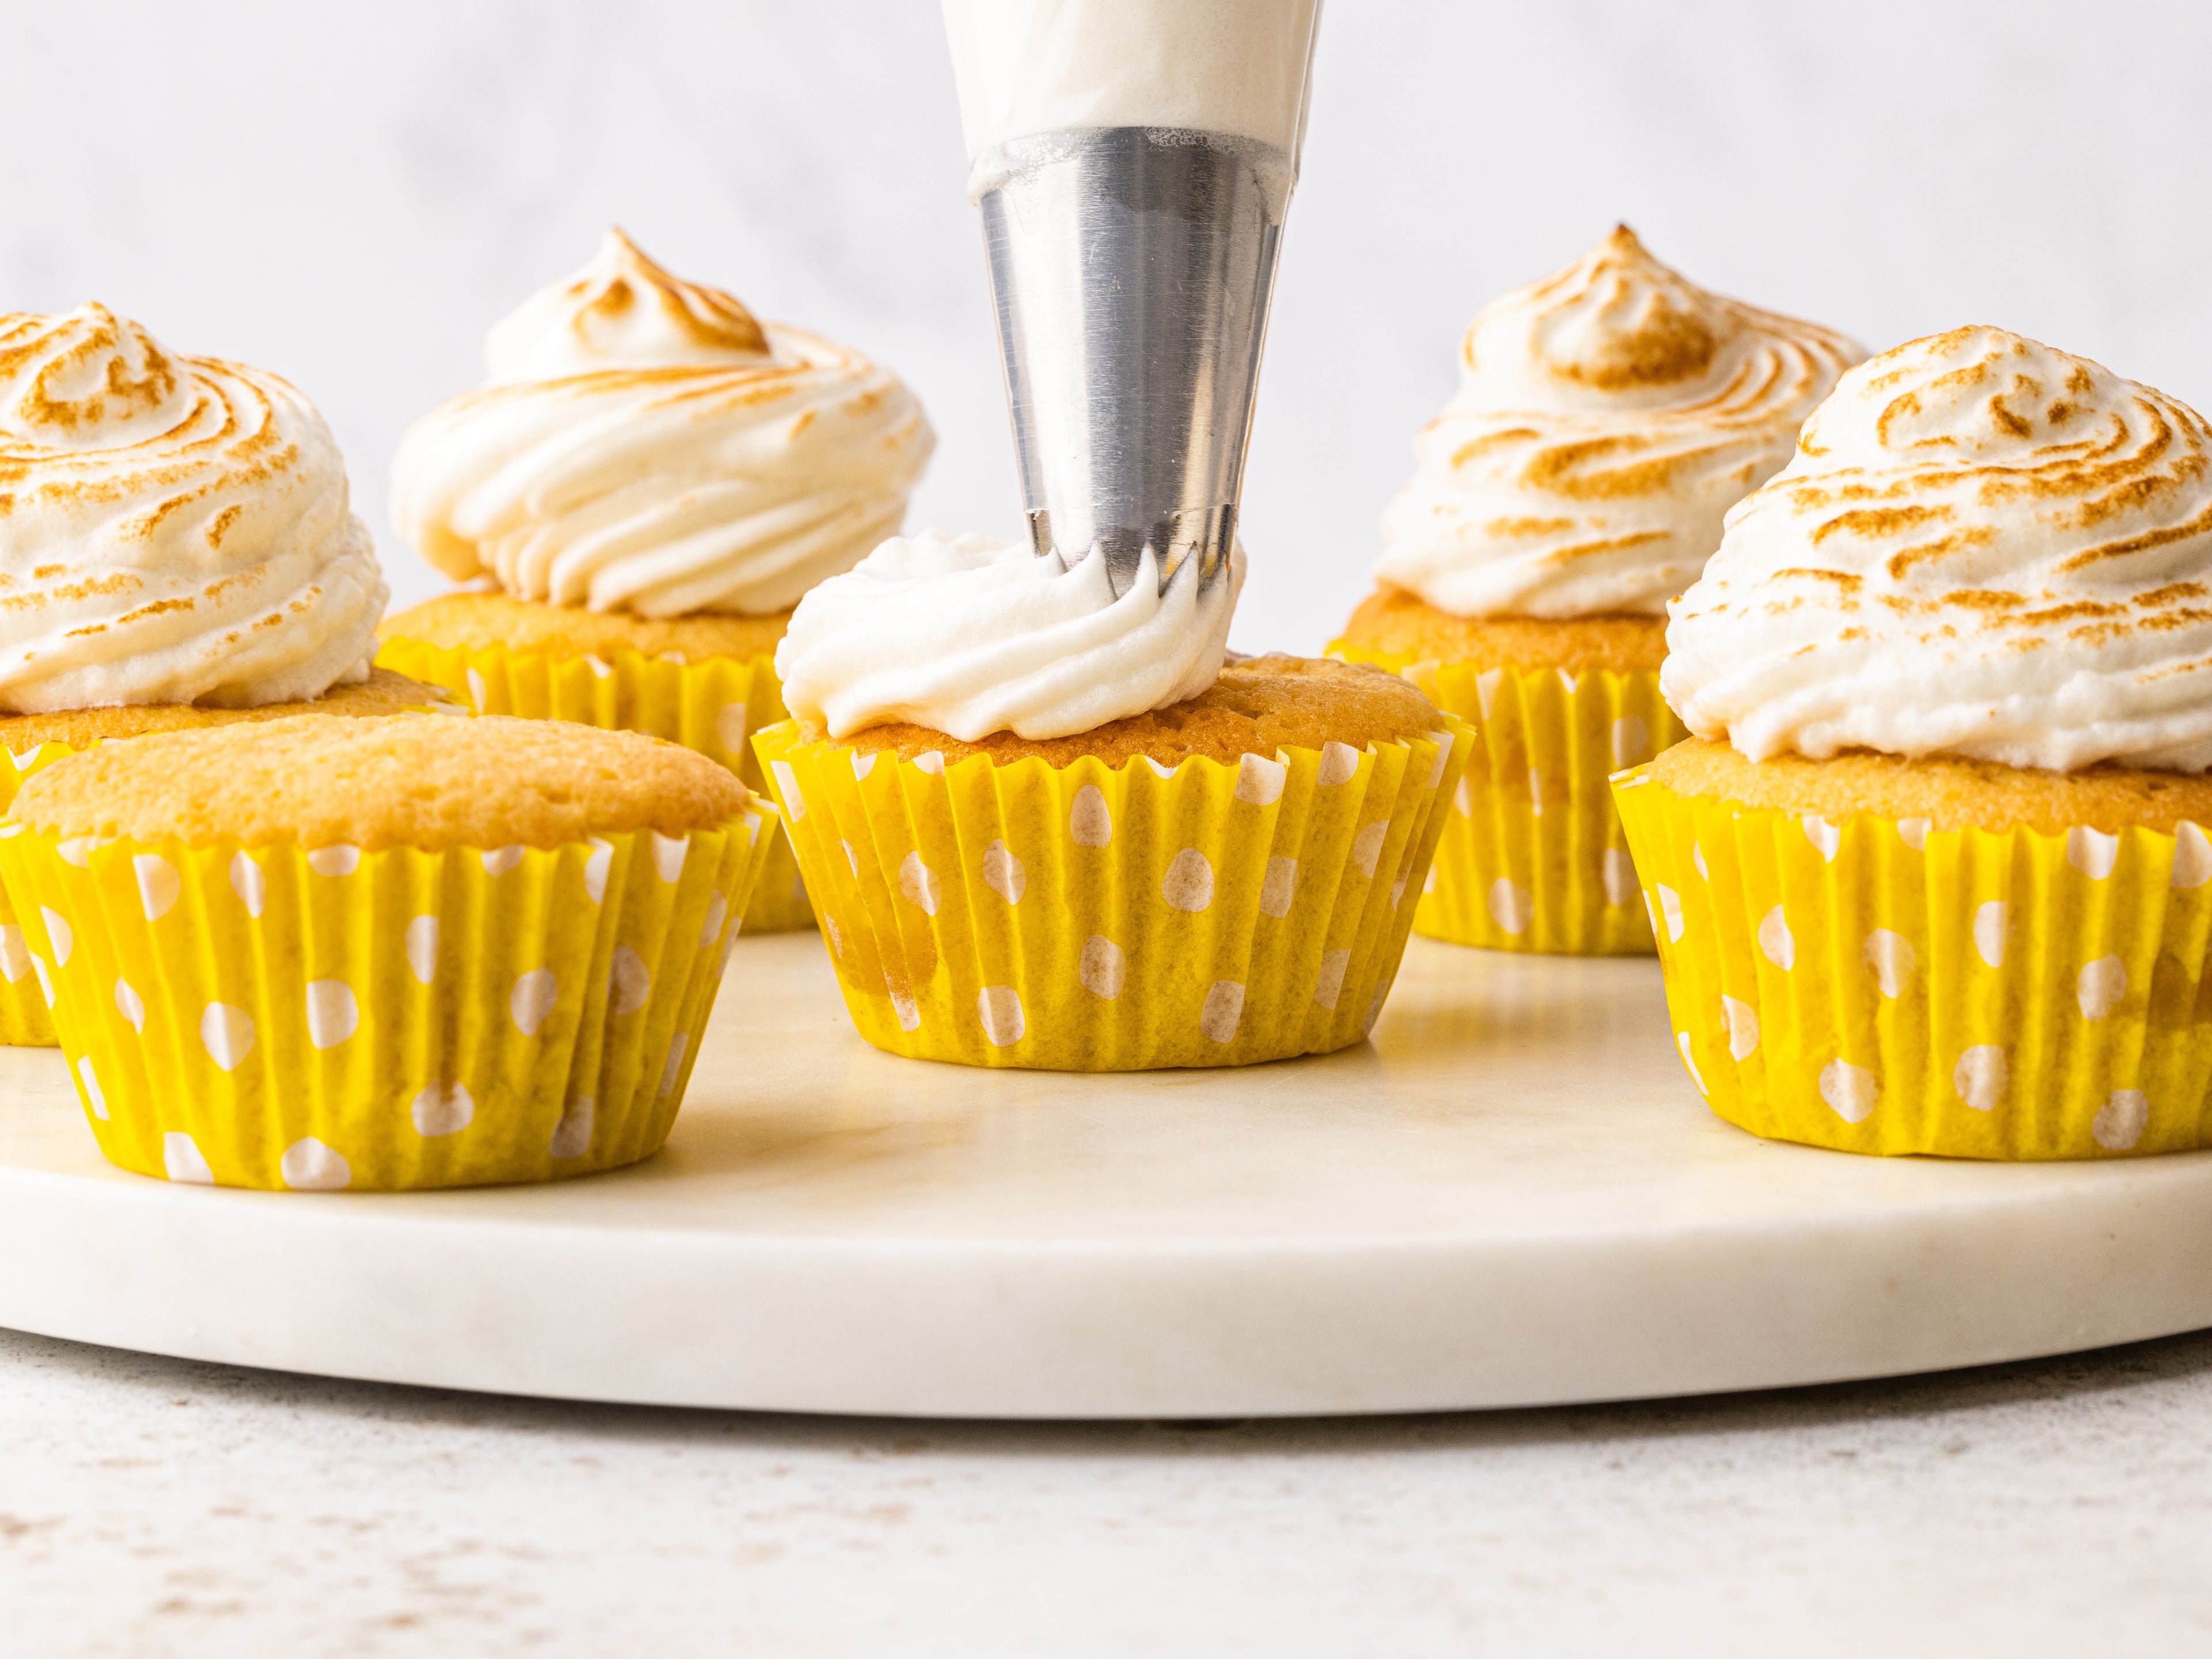 Meringue being piped on top of cupcakes in yellow cupcake cases